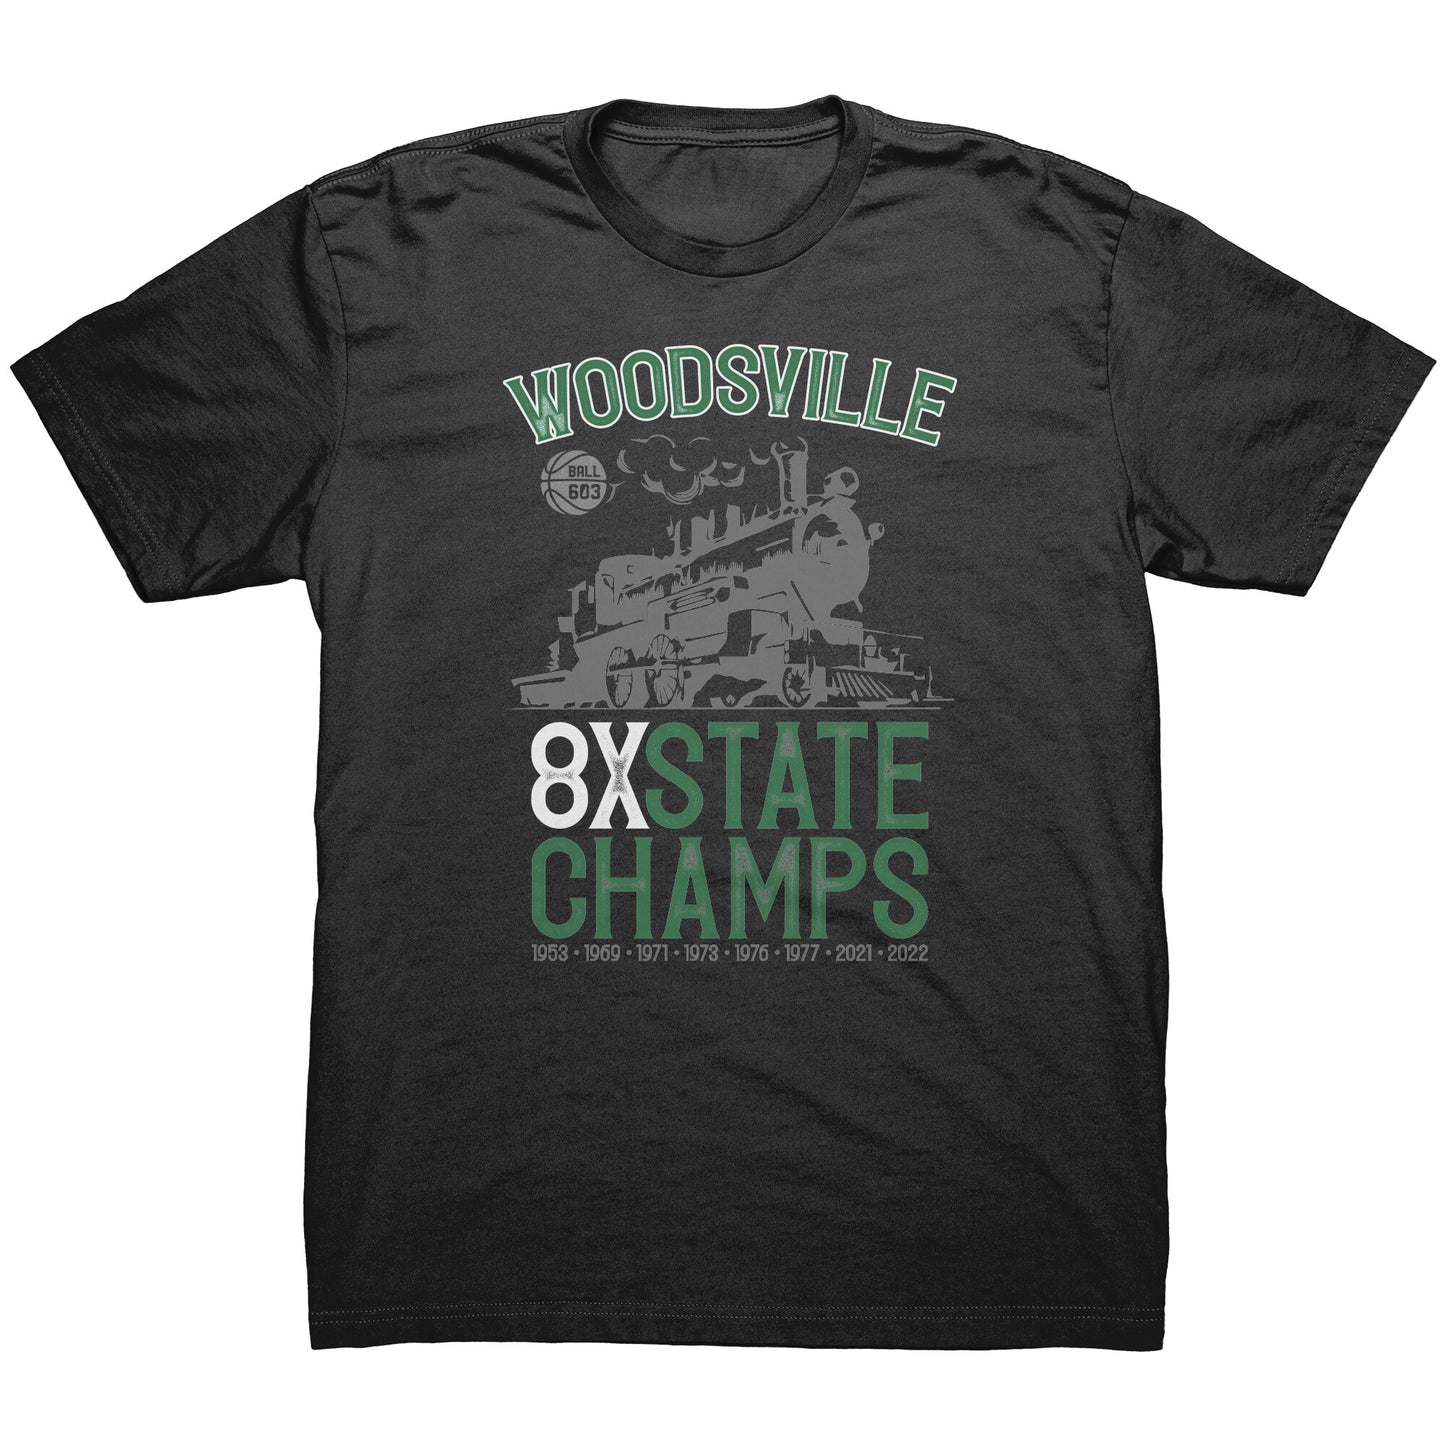 Woodsville State Champs (Men's Cut)